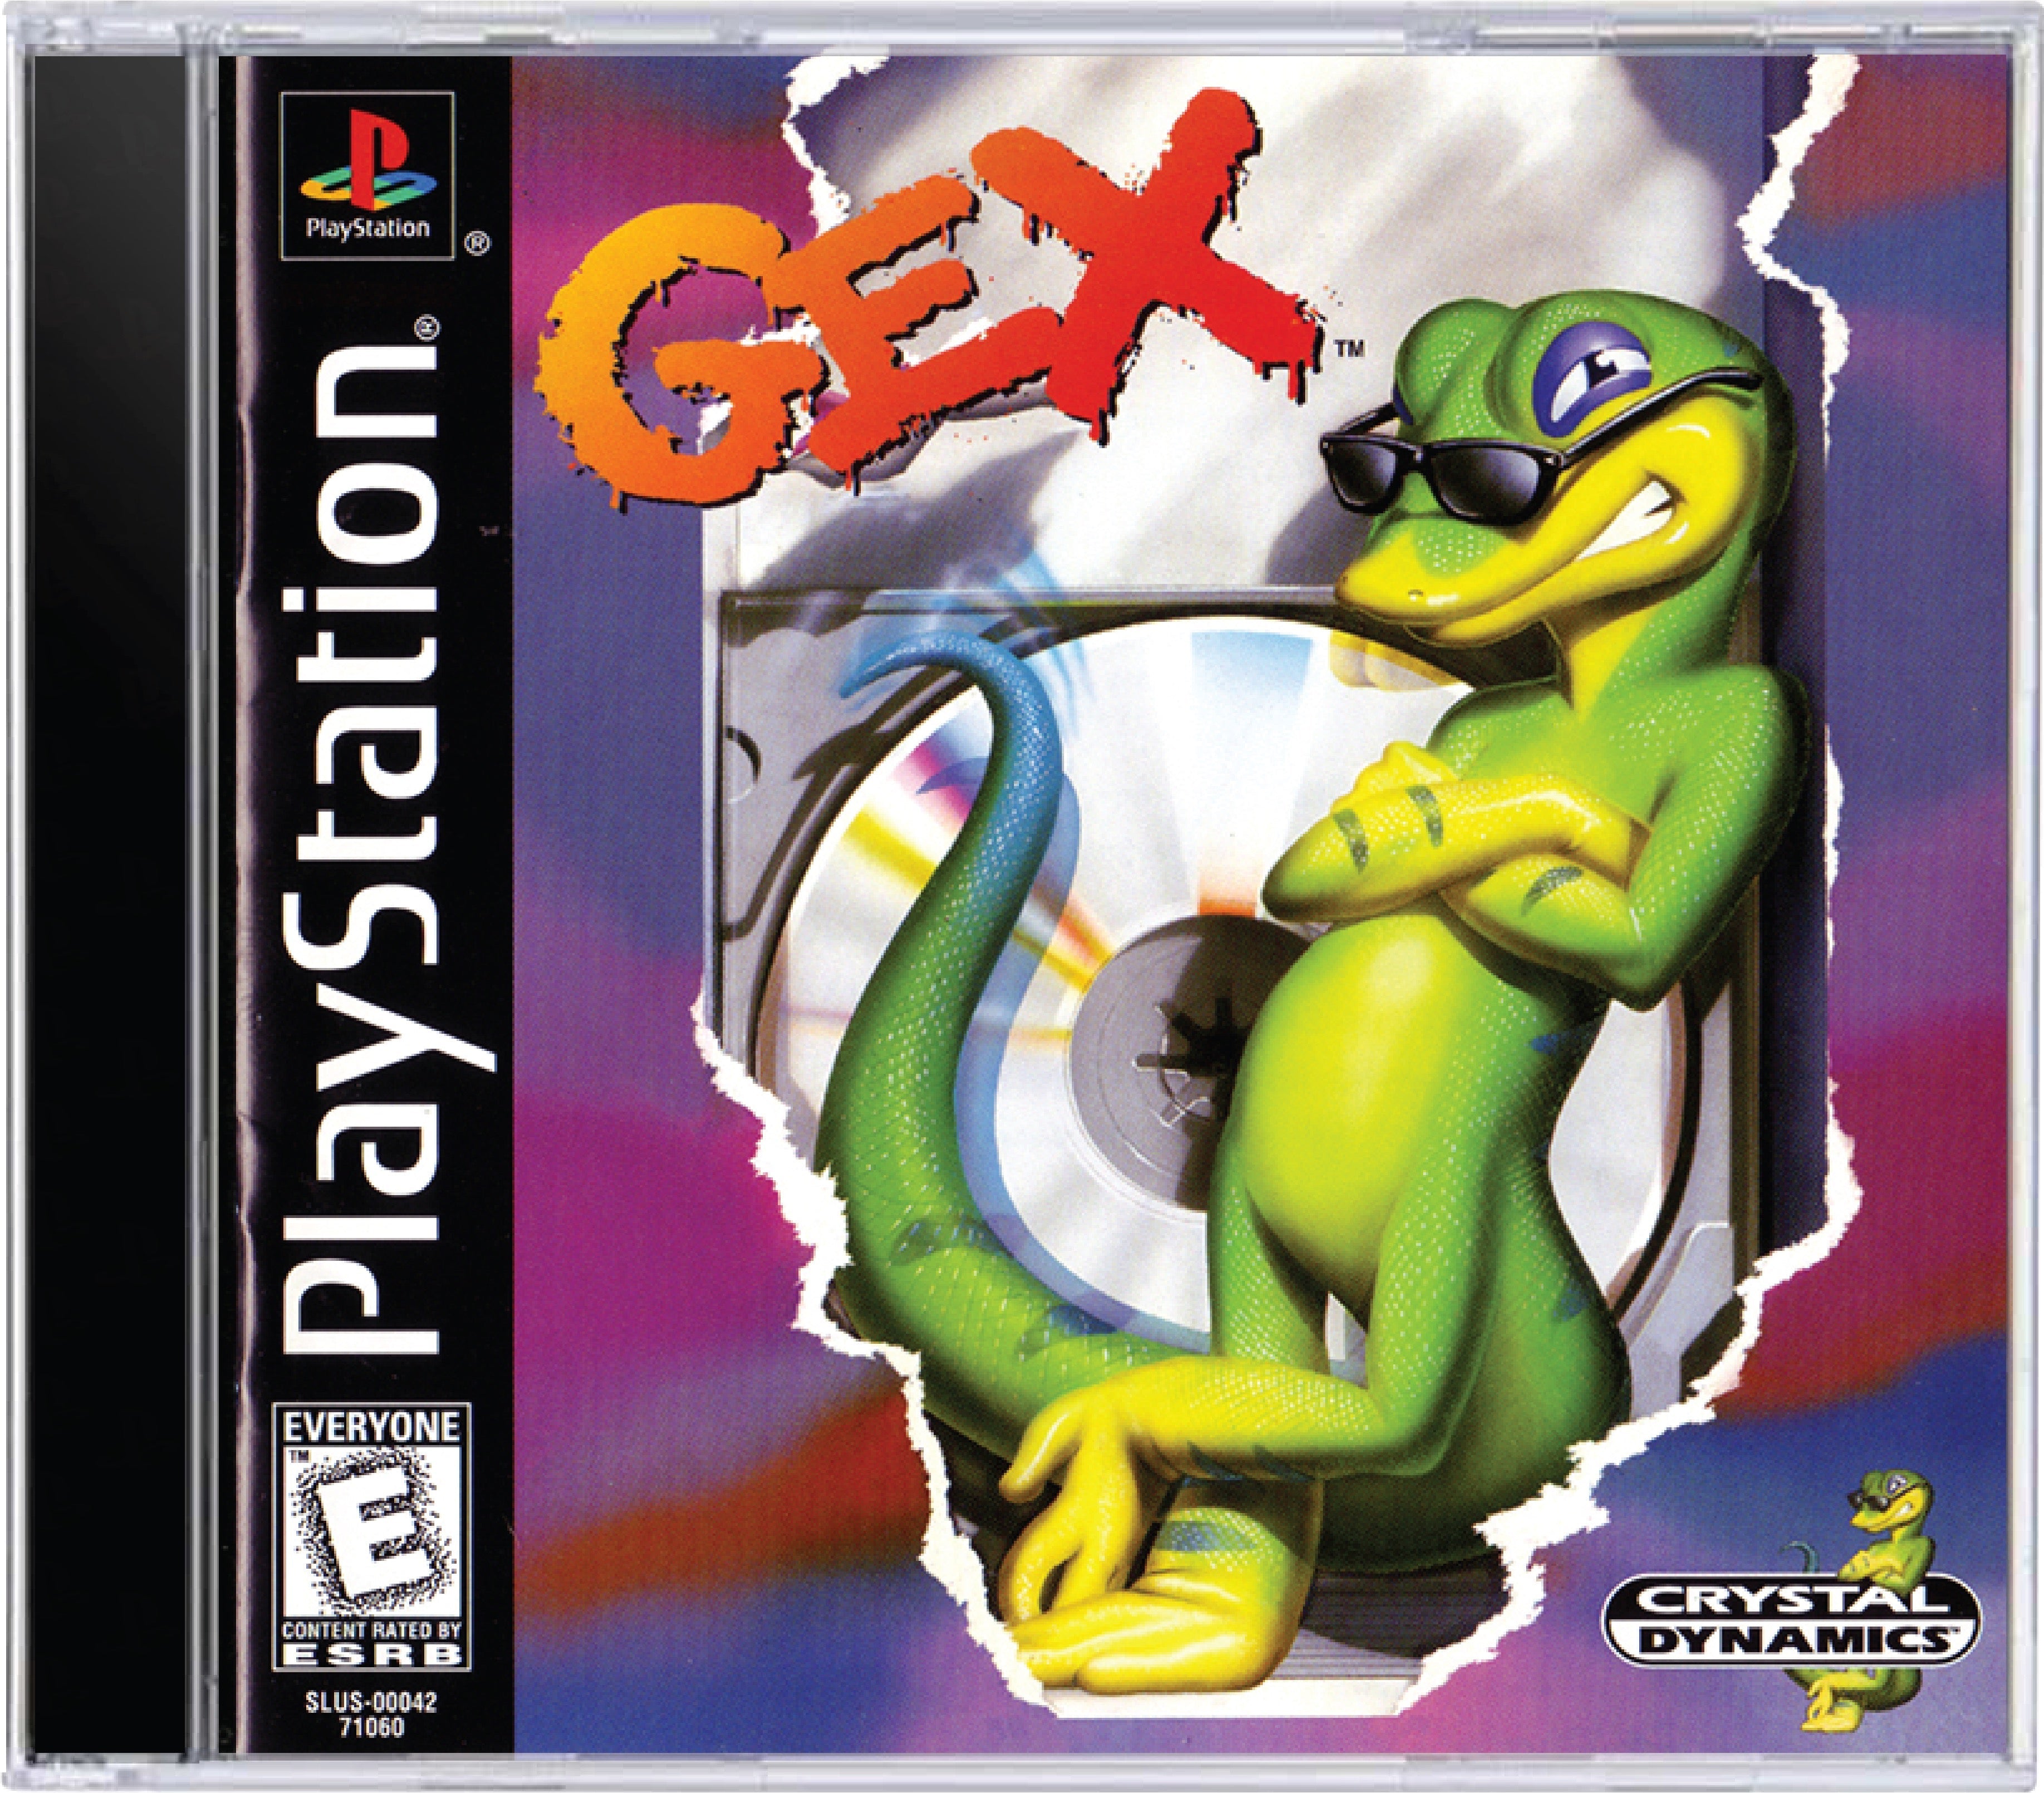 Gex Cover Art and Product Photo